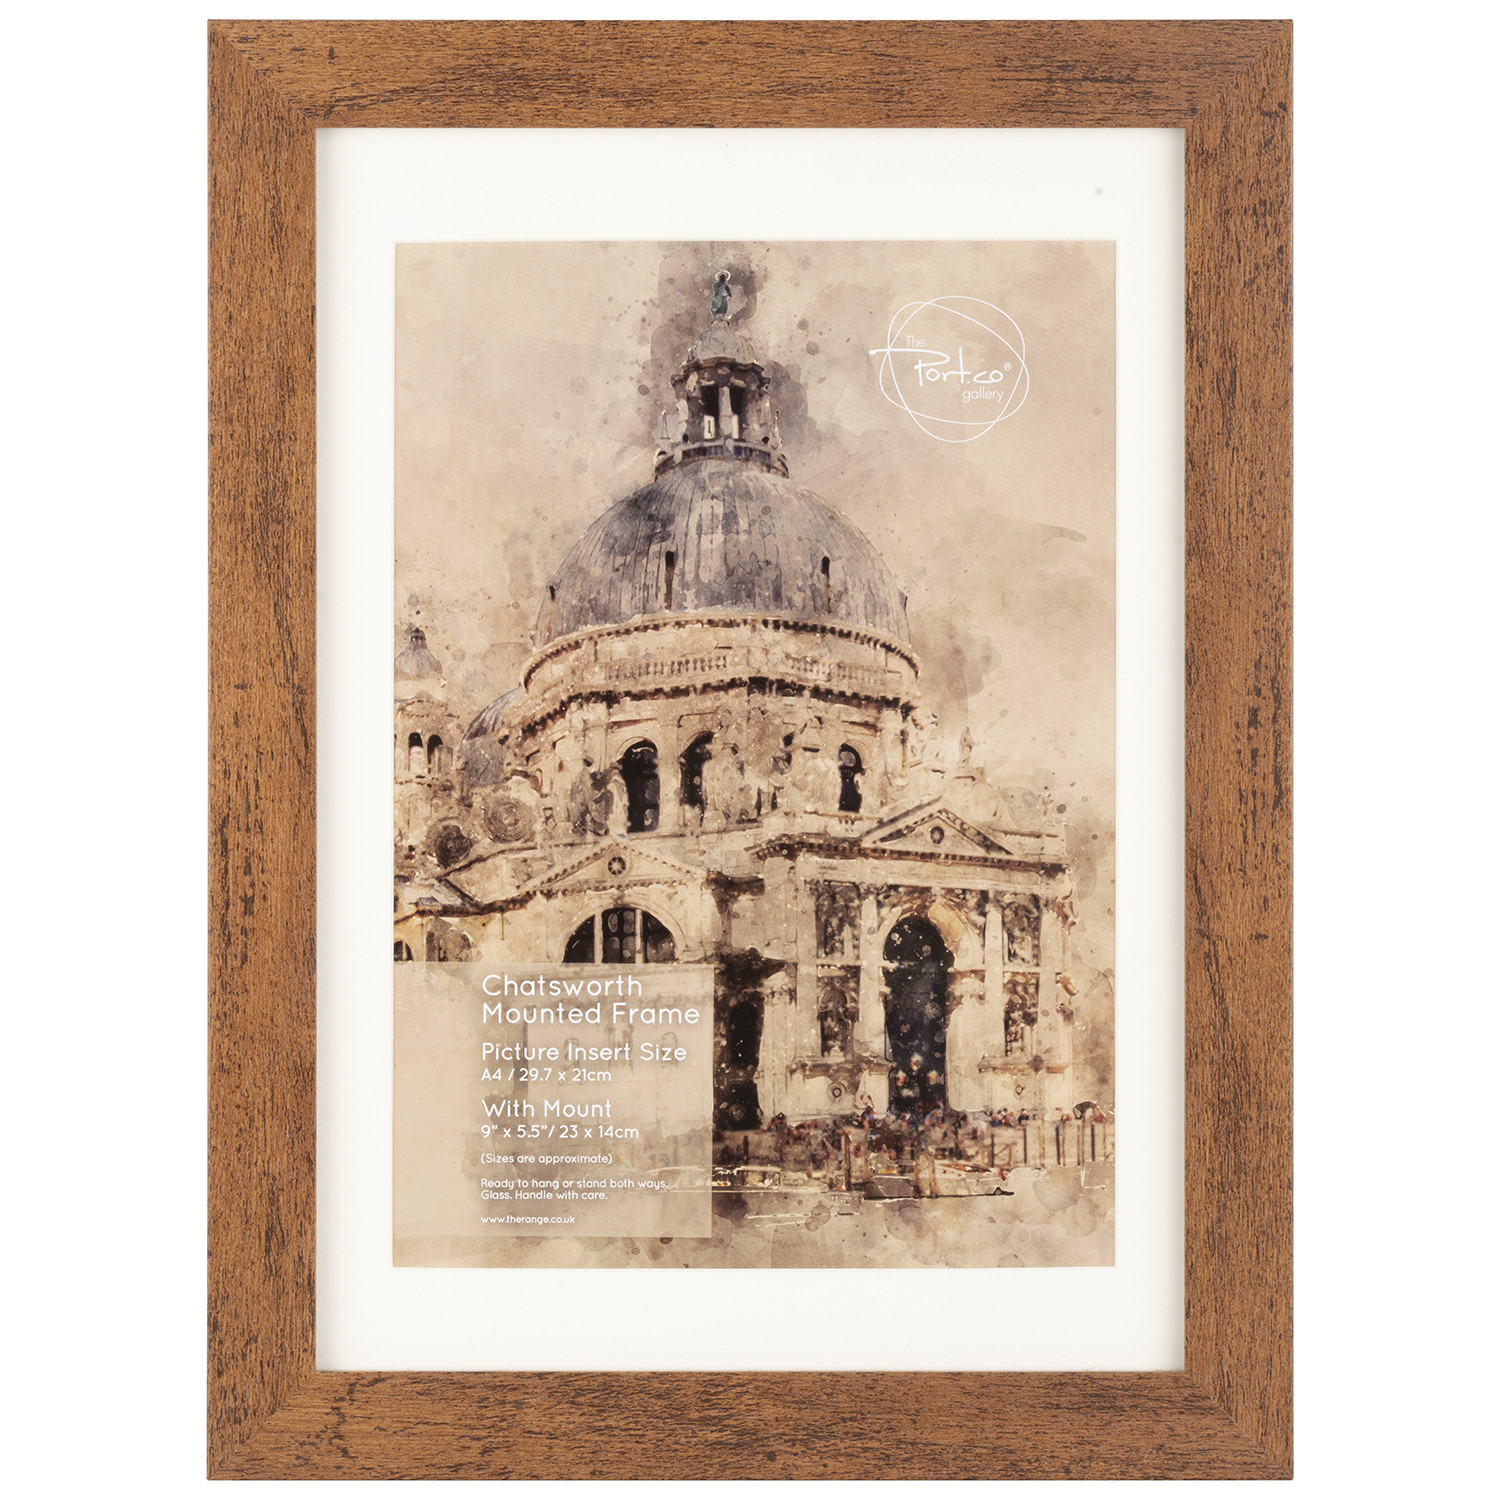 The Port. Co Gallery Chatsworth Wood Effect Photo Frame 9 x 5.5 inch Image